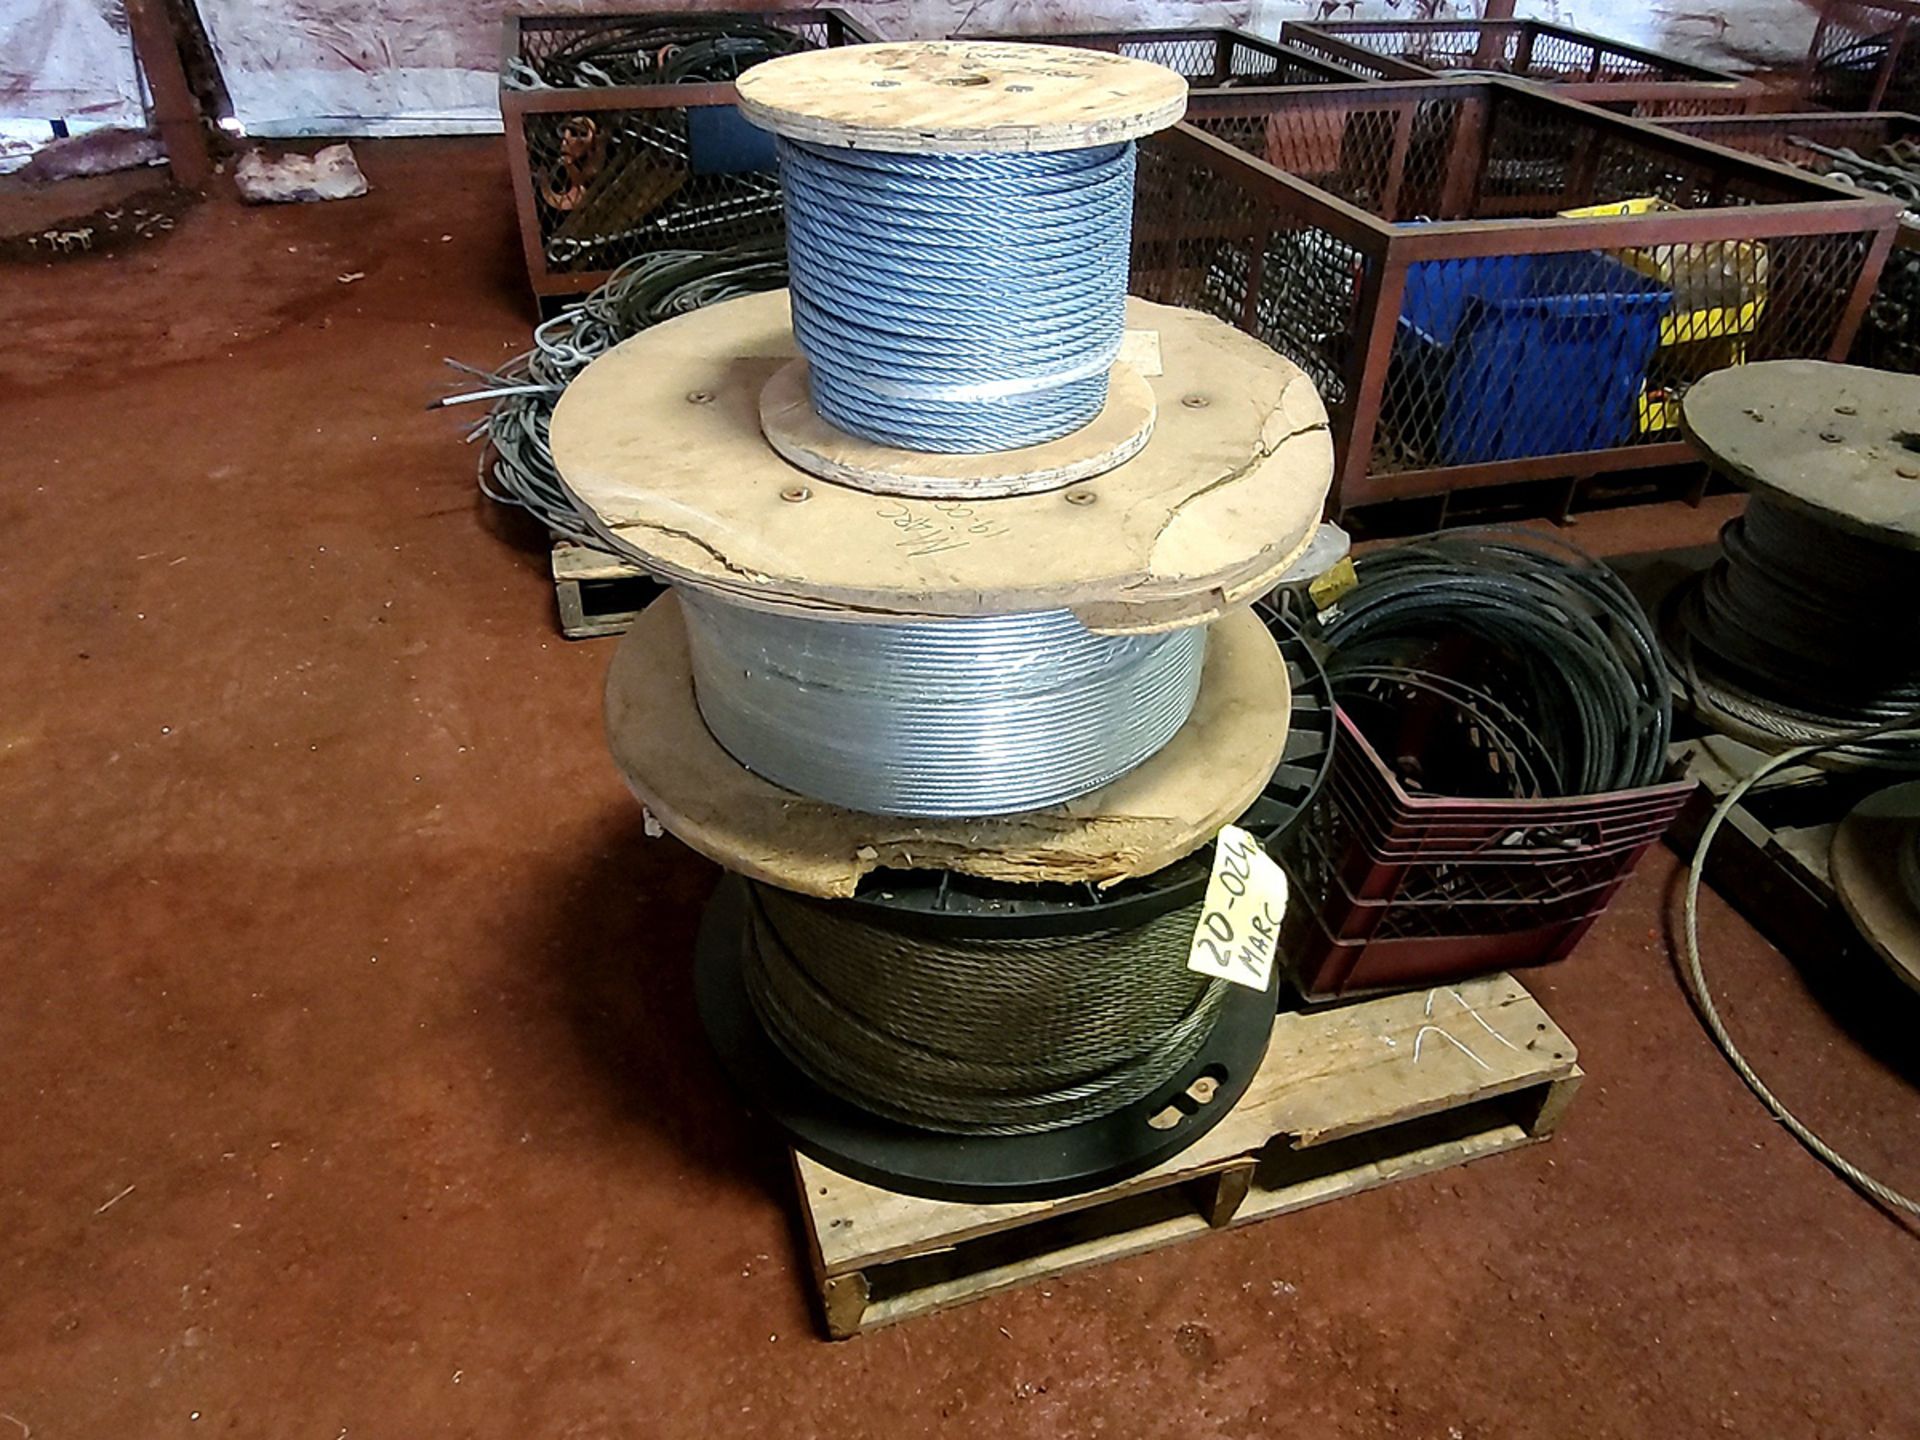 A Group of Braided Cable Spools on Pallet